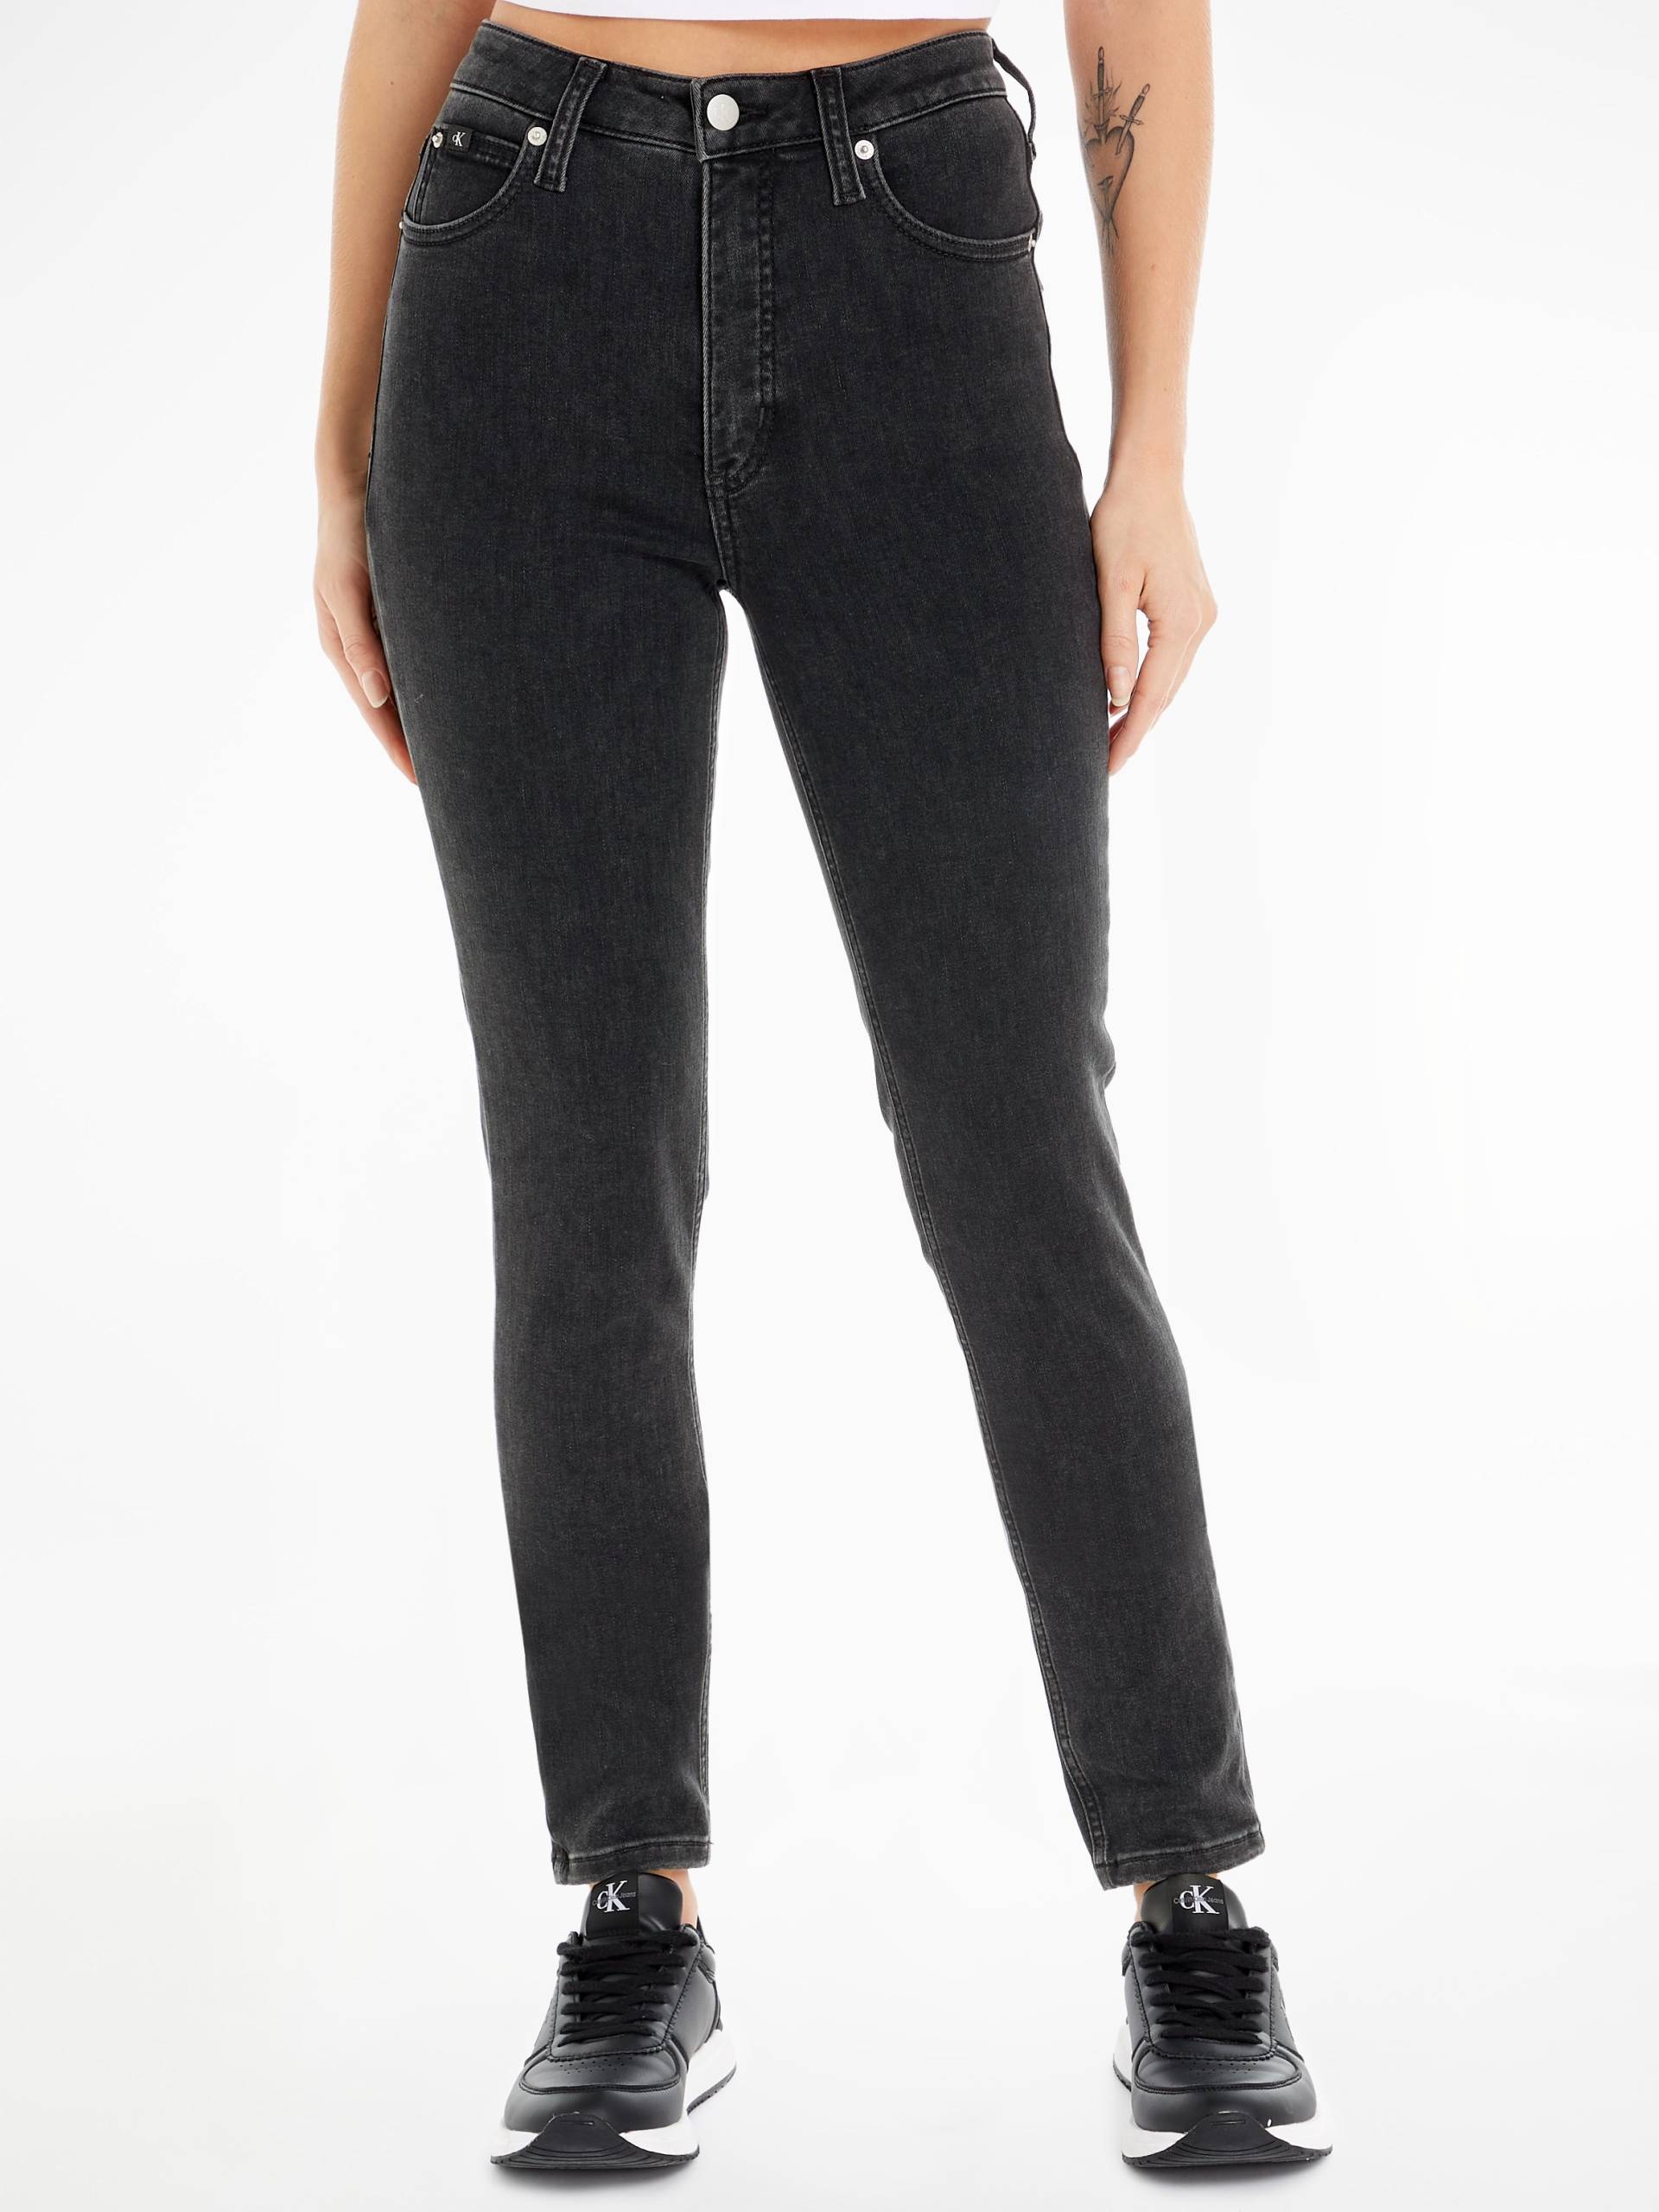 Calvin Klein Jeans Skinny-fit-Jeans »HIGH RISE SKINNY« von Calvin Klein Jeans